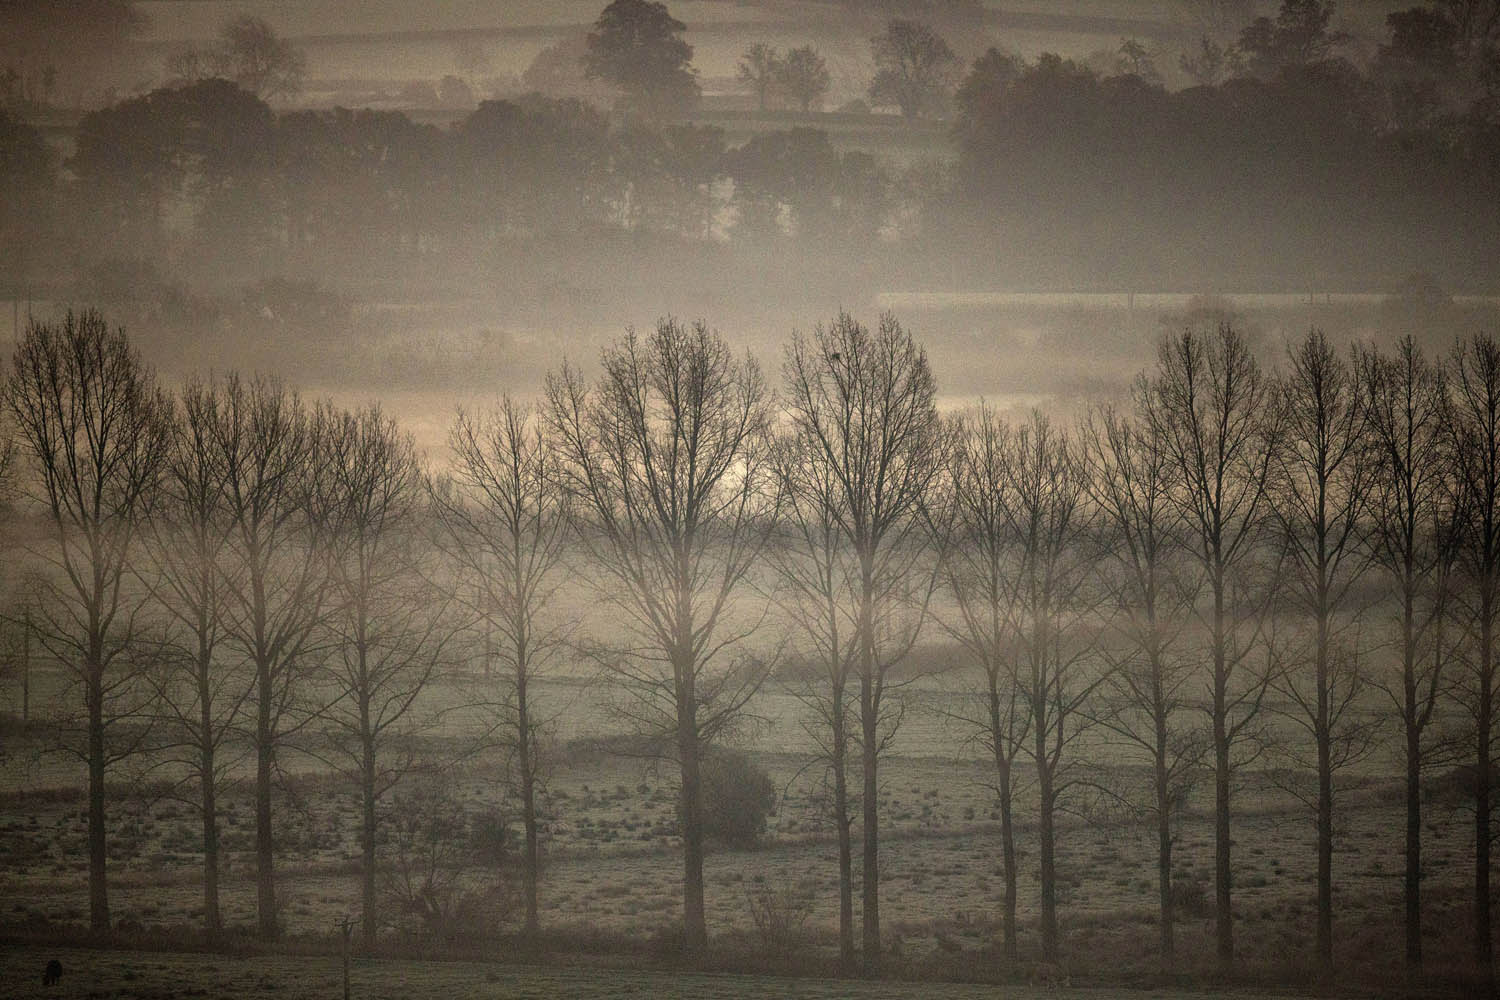 Nov. 26, 2013. Mist lingers around trees on the Somerset Levels as the early morning sun rises in Glastonbury, England.